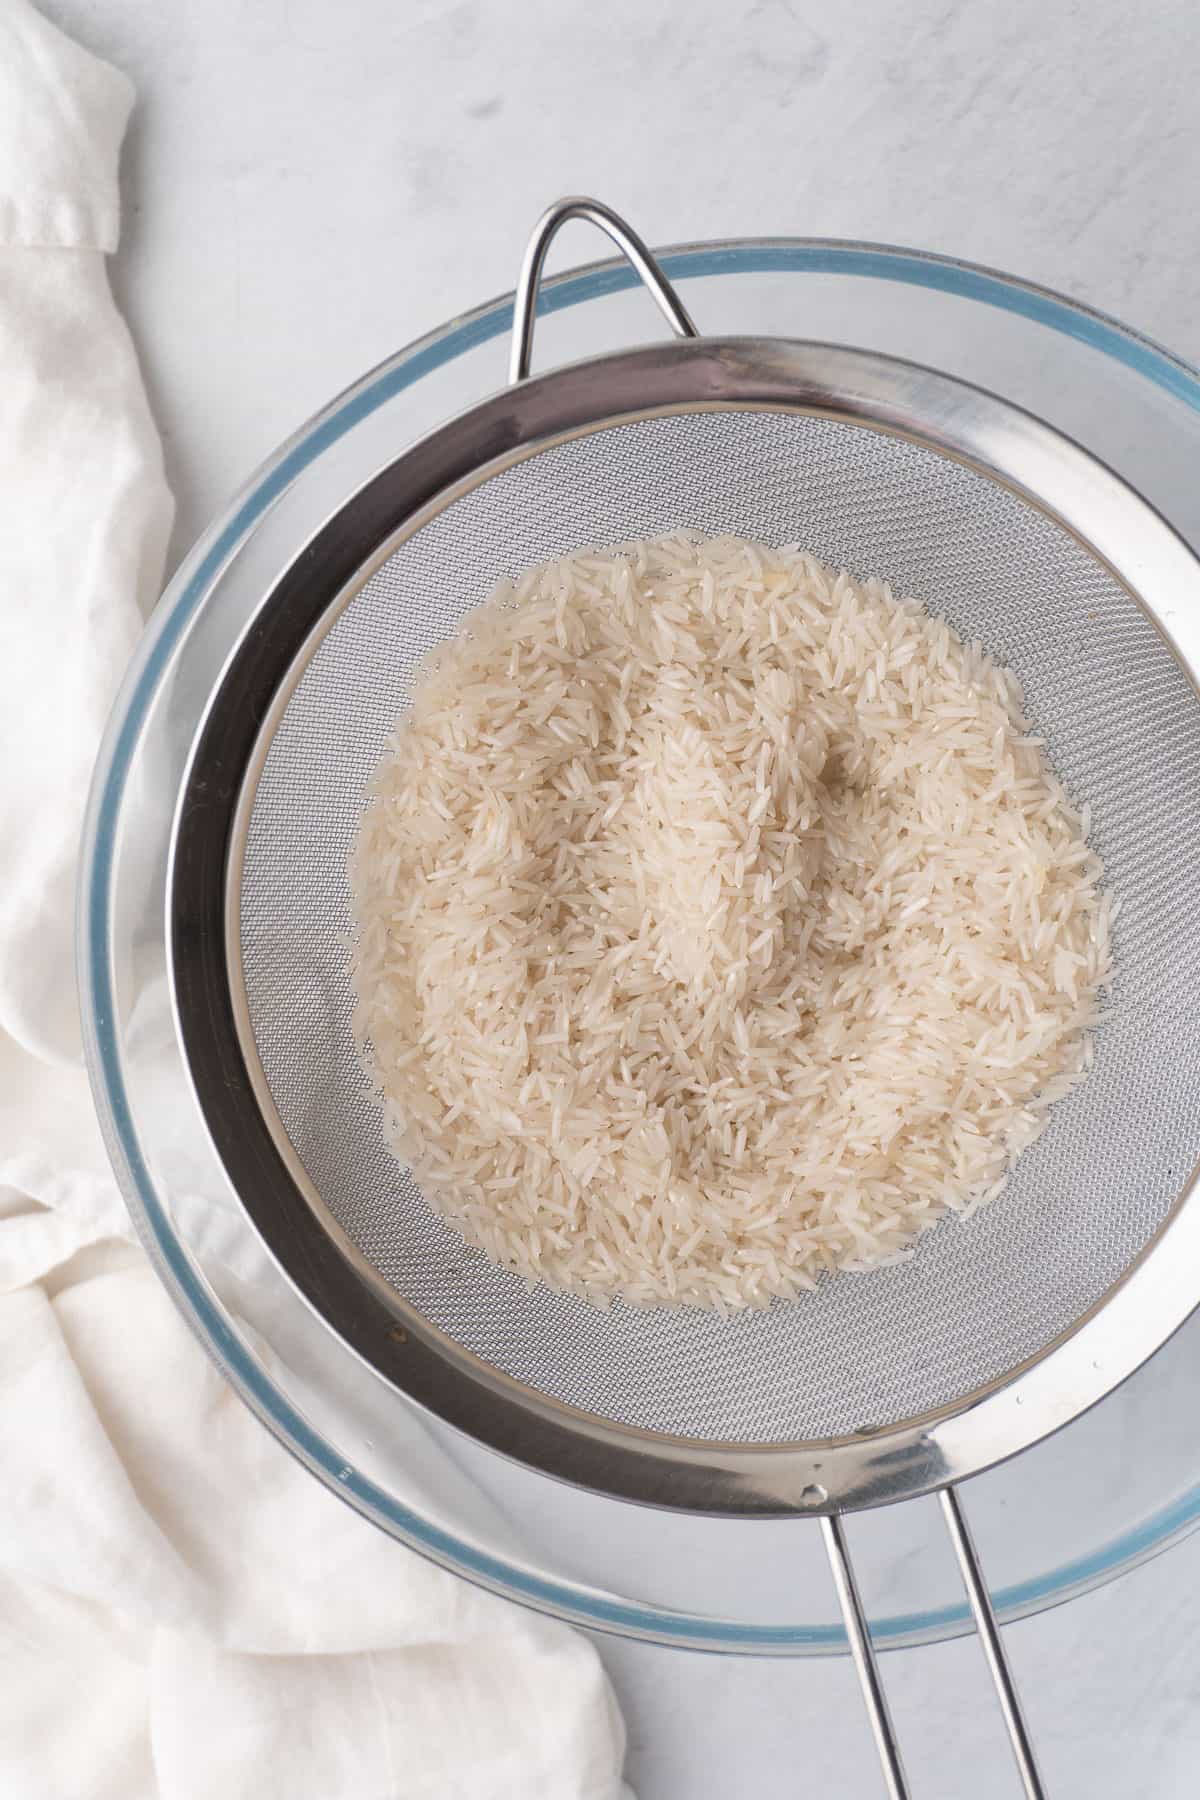 rice being rinsed with cold water